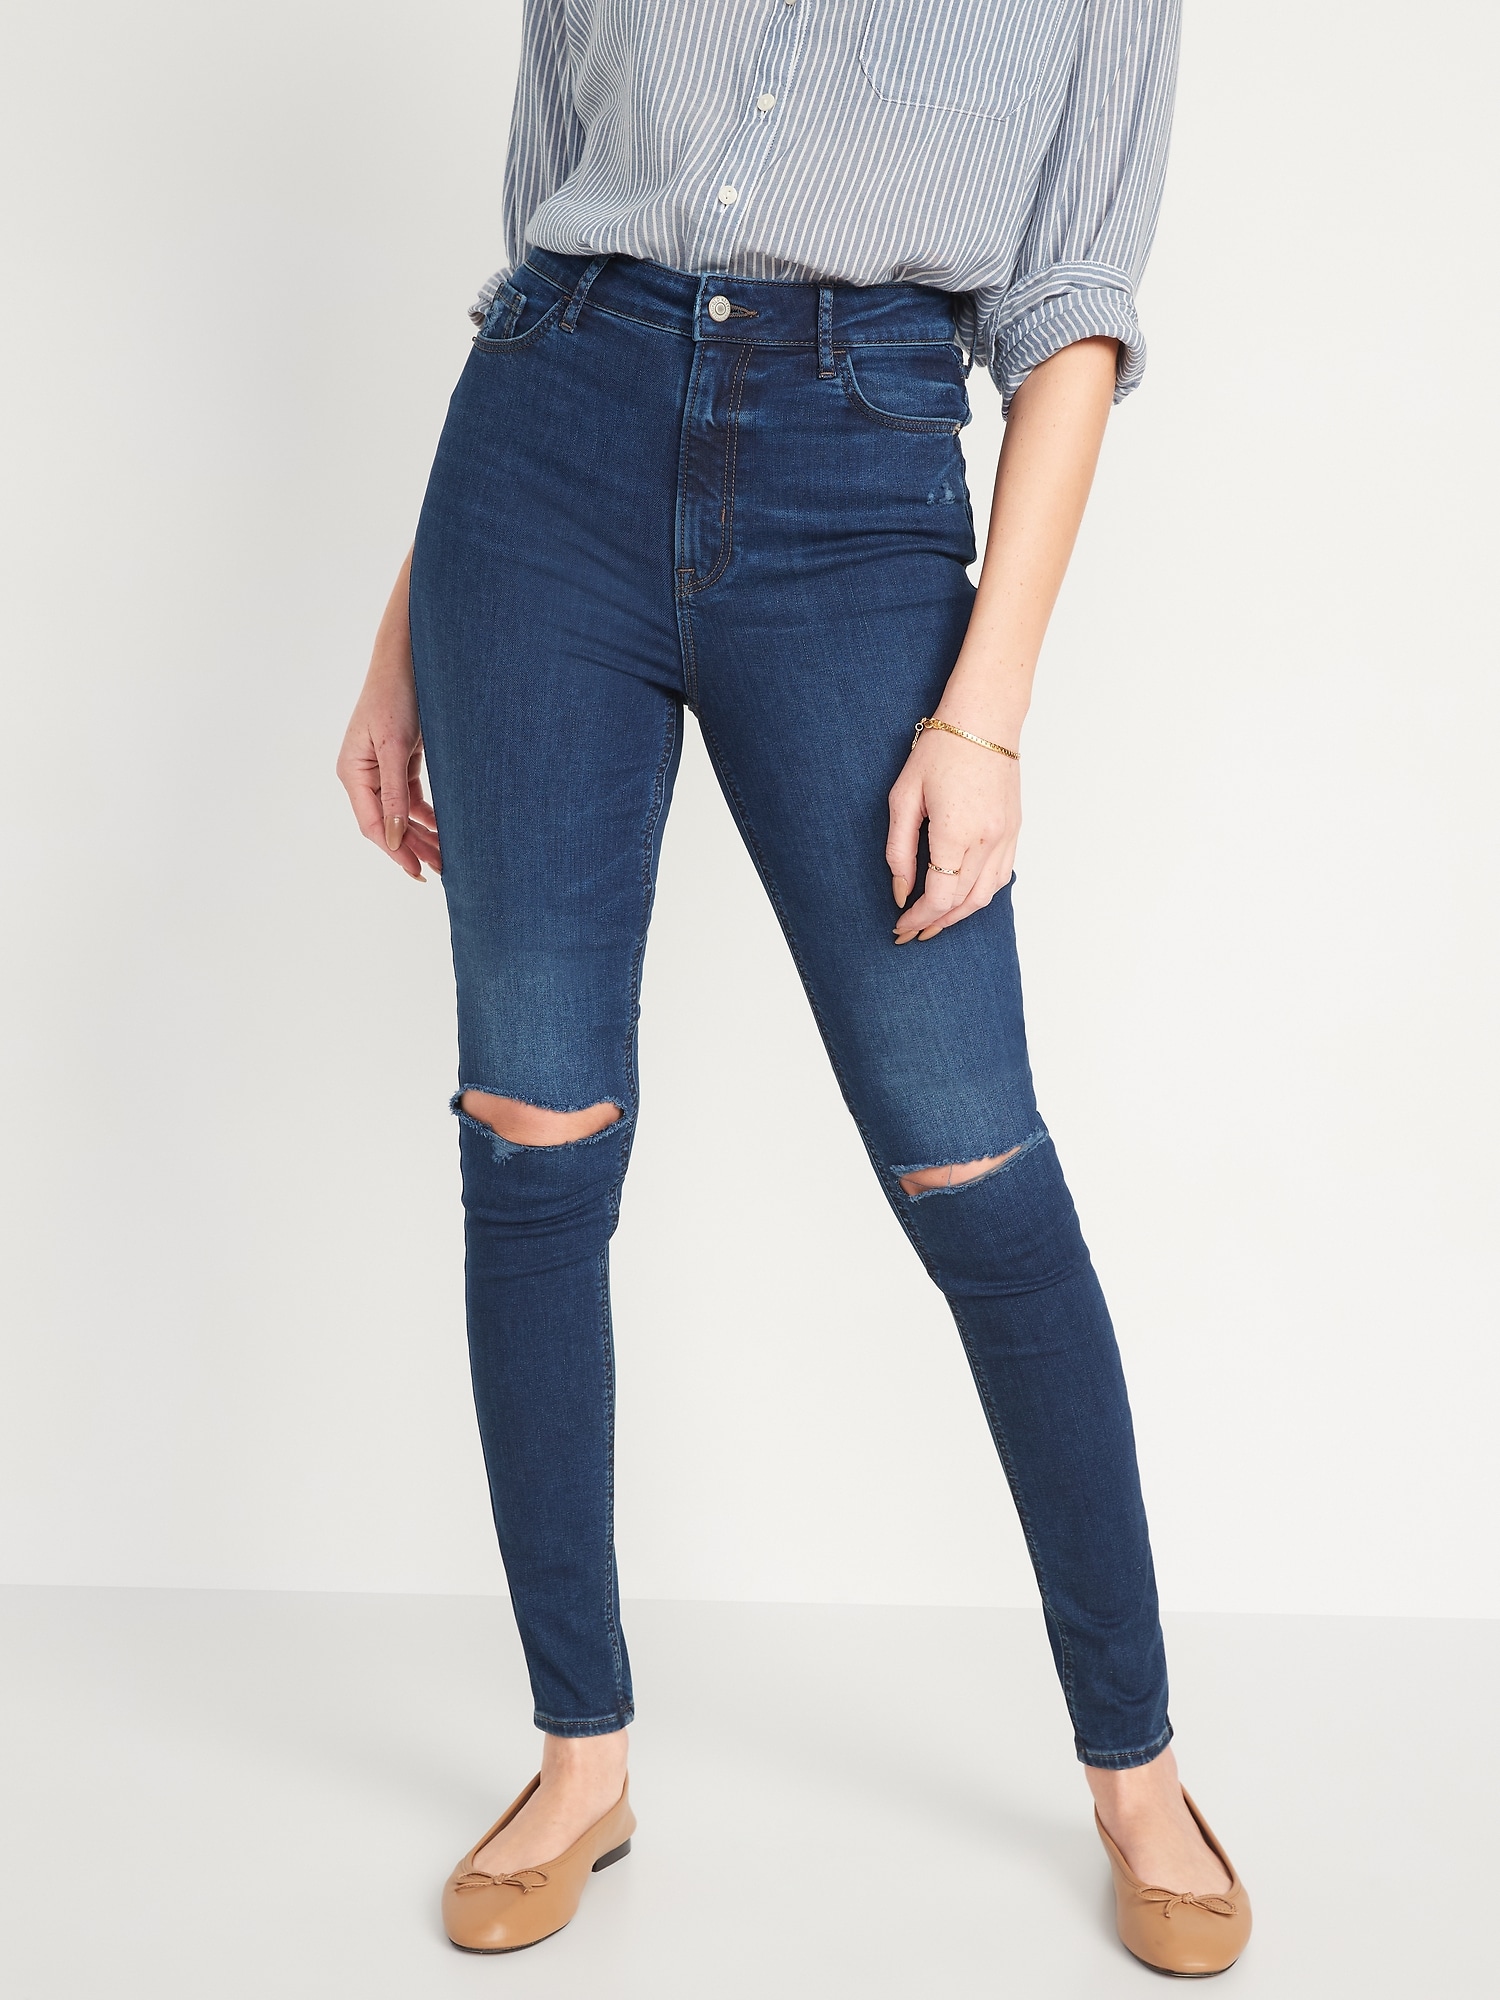 Old Navy FitsYou 3-Sizes-in-1 Extra High-Waisted Rockstar Super-Skinny Ripped Jeans for Women blue. 1